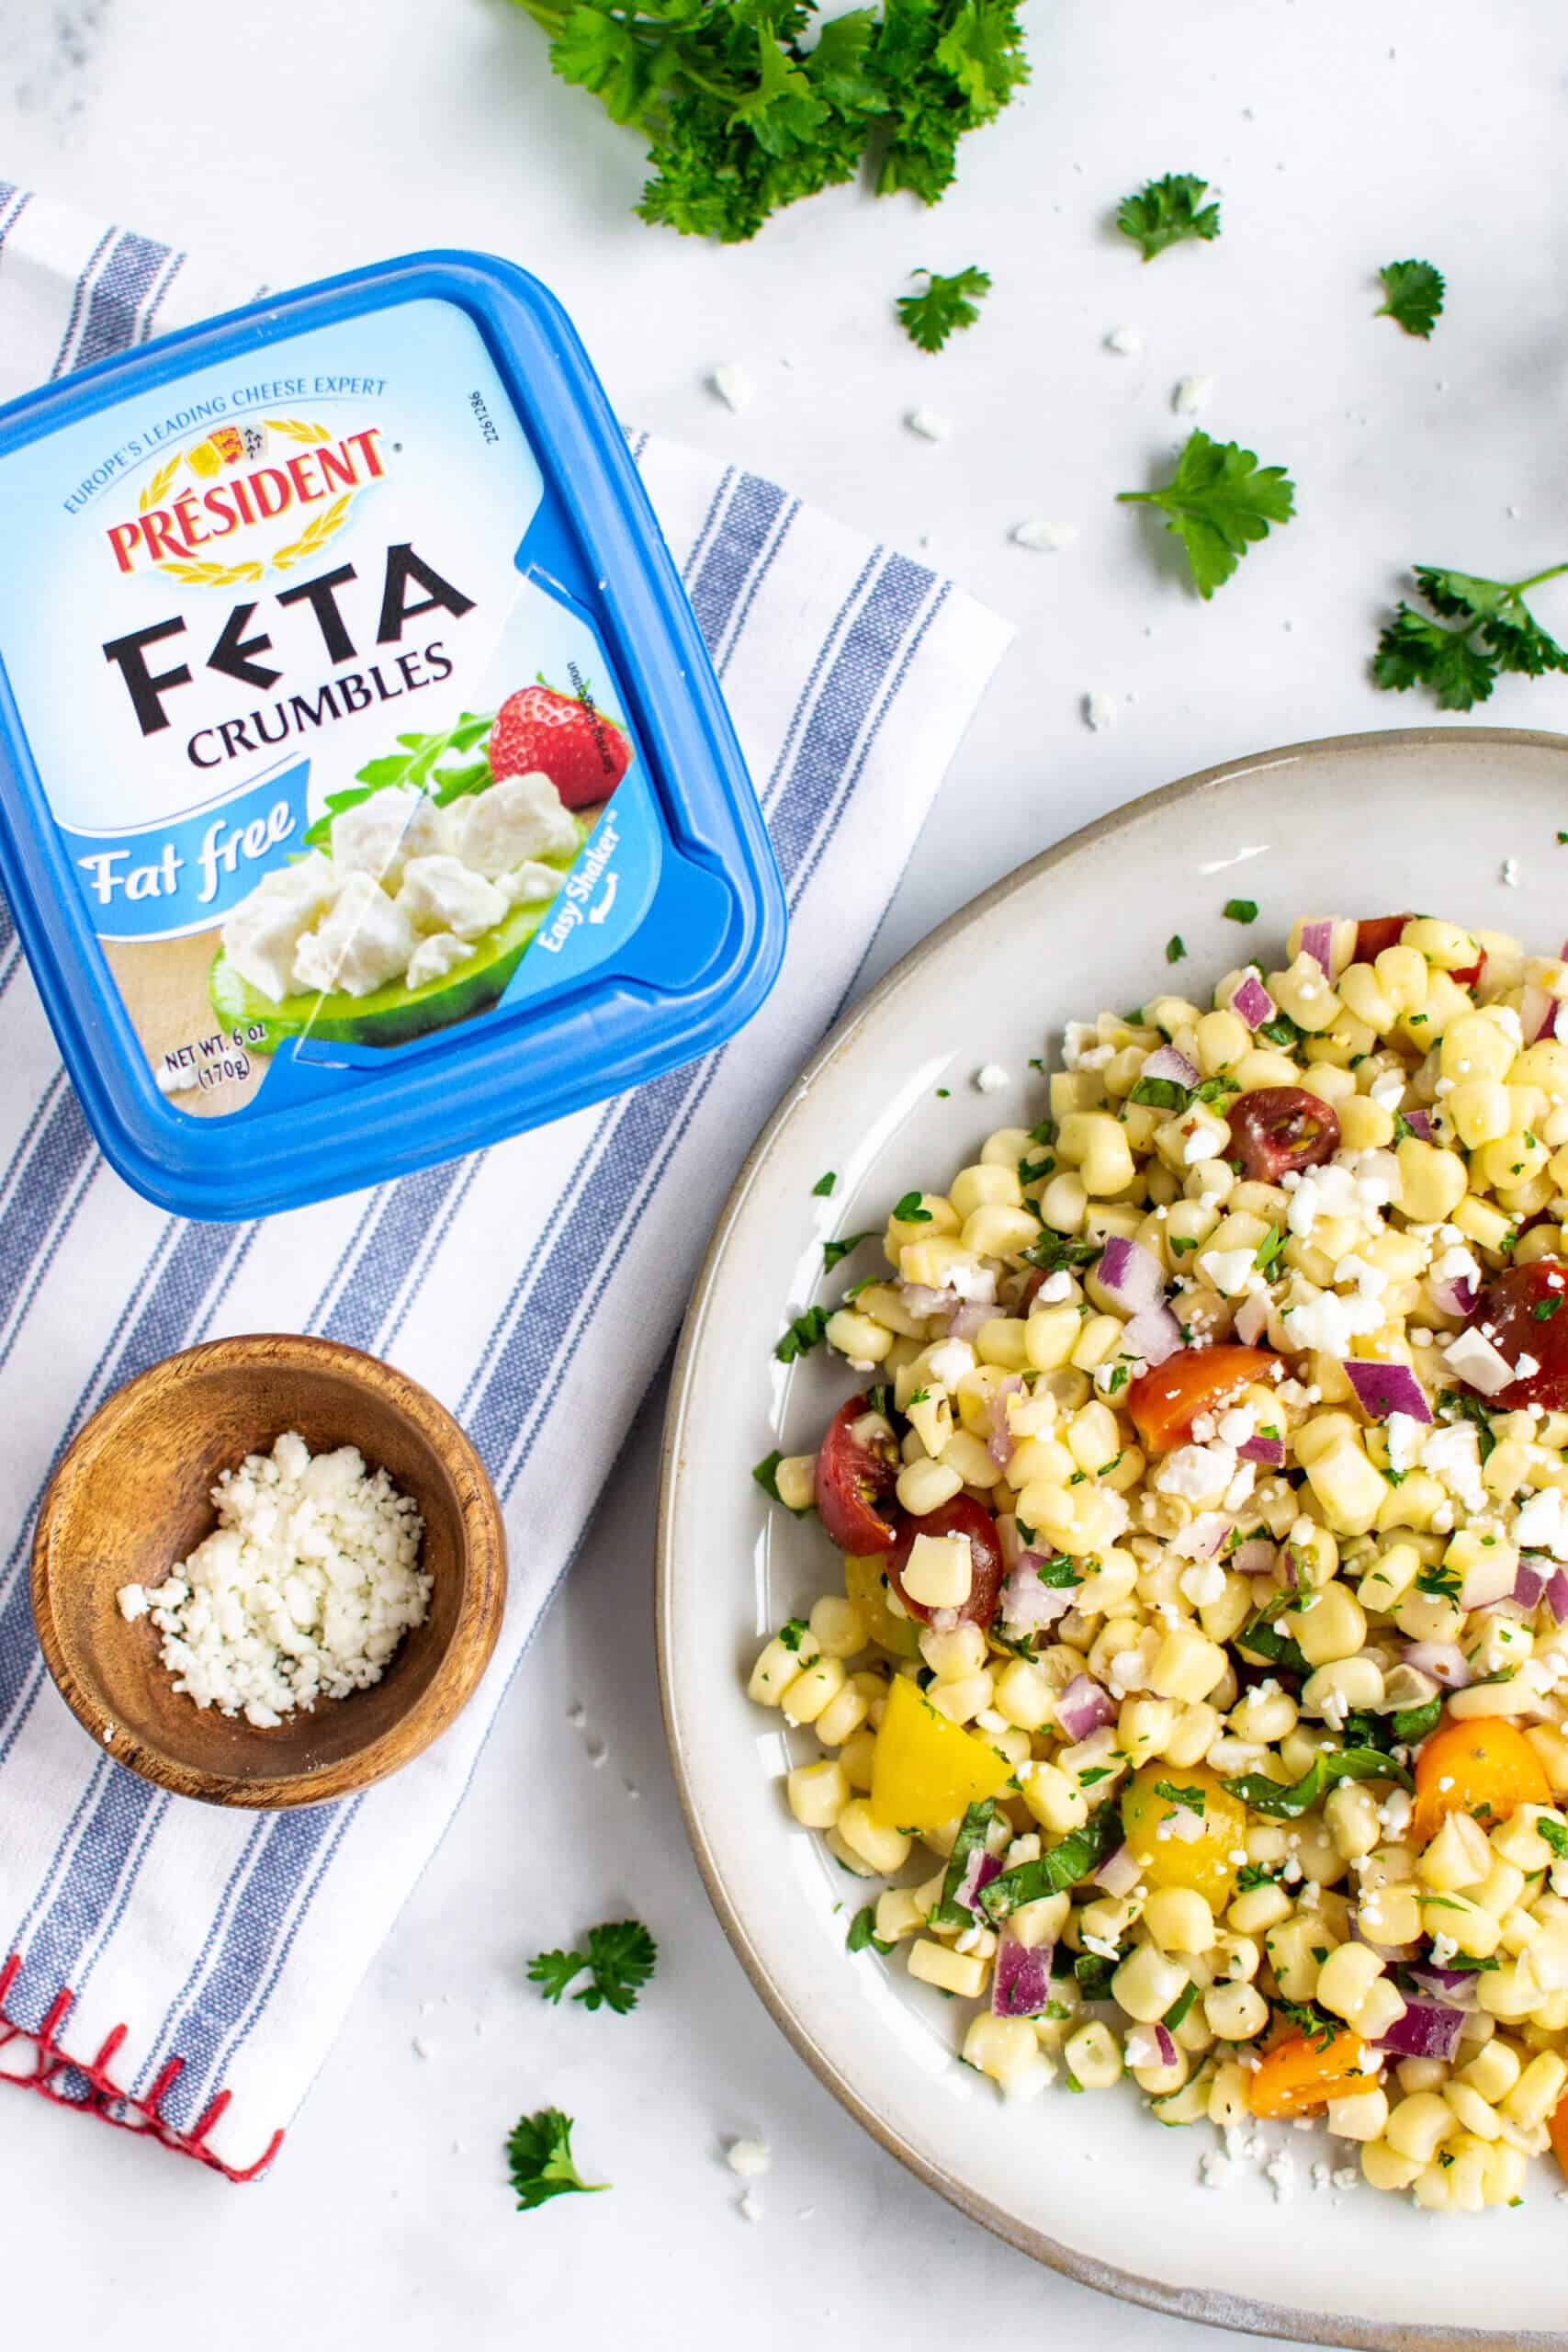 Simple sweet corn salad on a plate with Président Feta Crumbles package.